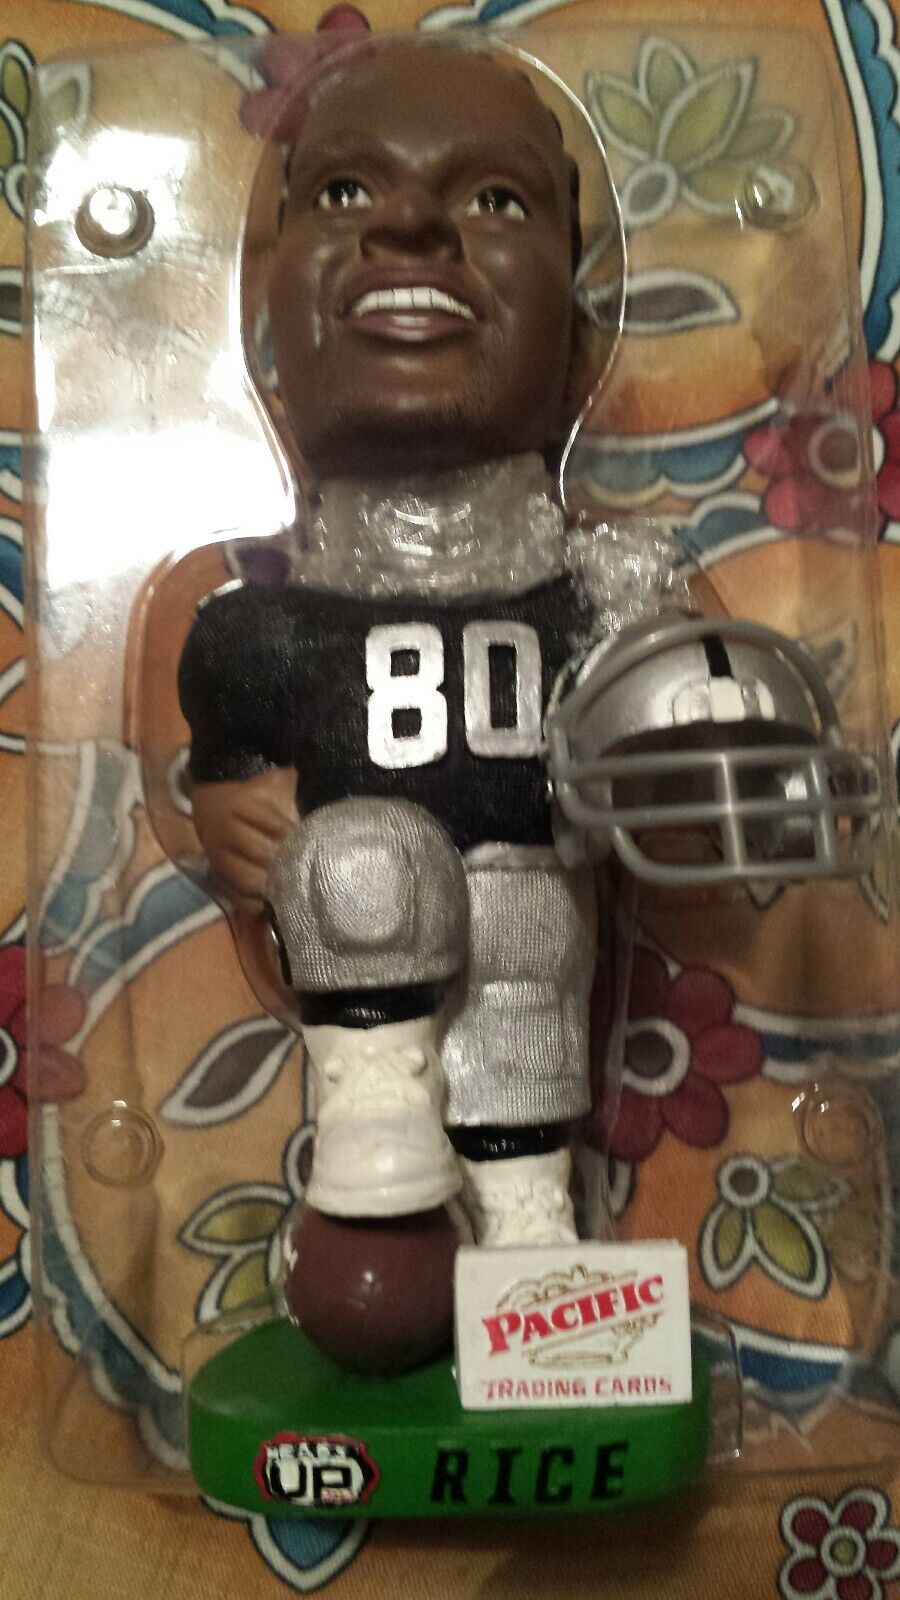 2002 Pacific heads up Jerry Rice bobblehead Oakland Raiders 1000 made new in box